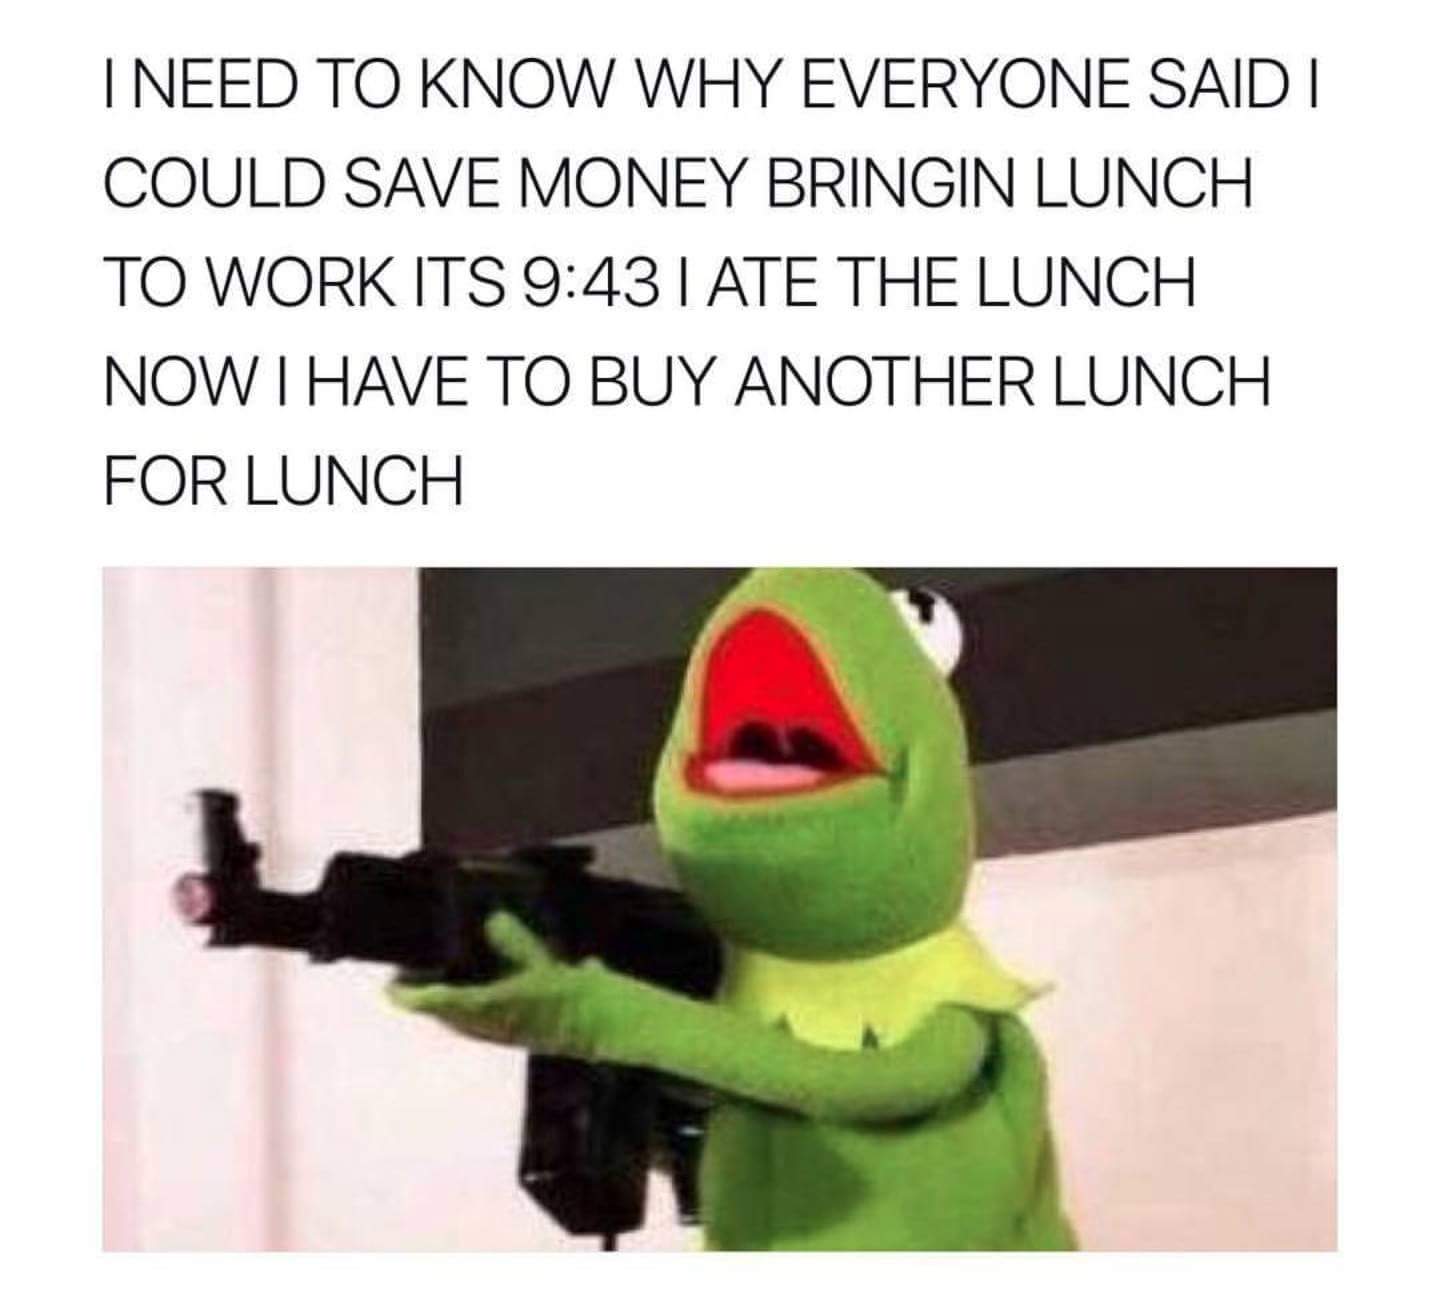 Kermit the frog with machine gun as reaction meme to people recommending you bring in lunch to save money and ate your lunch before 10 am